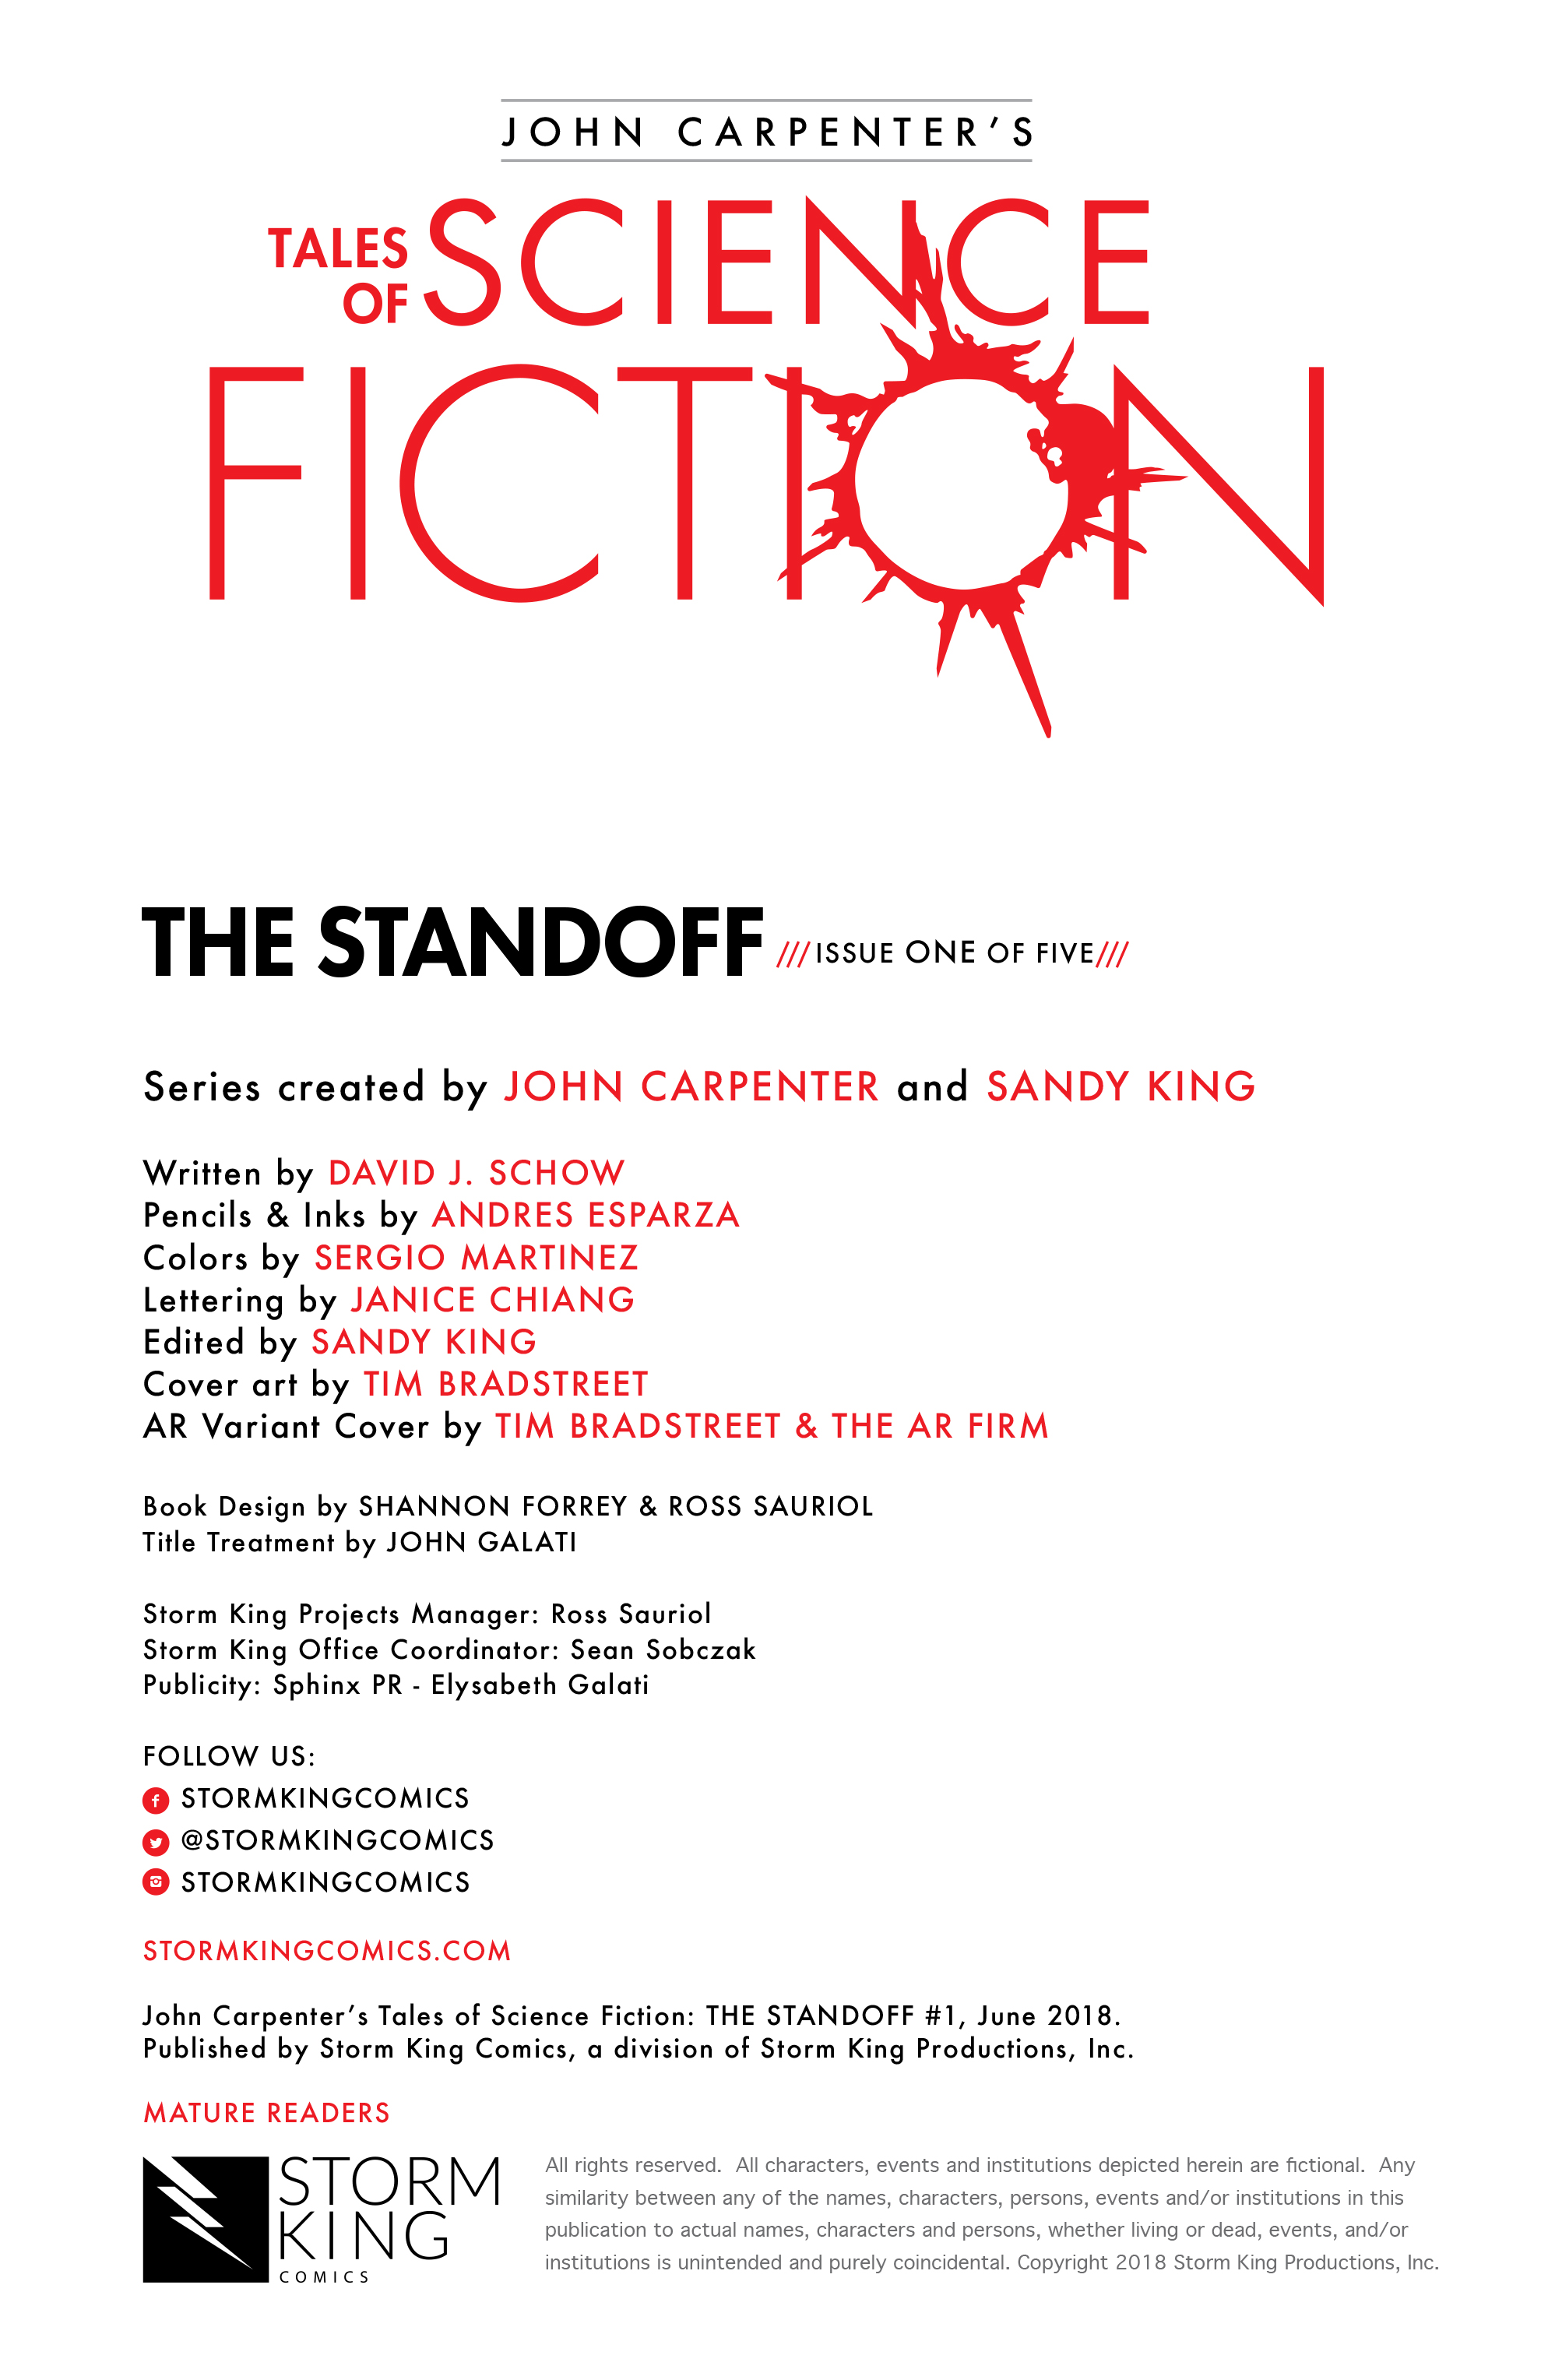 Read online John Carpenter's Tales of Science Fiction: The Standoff comic -  Issue #1 - 2